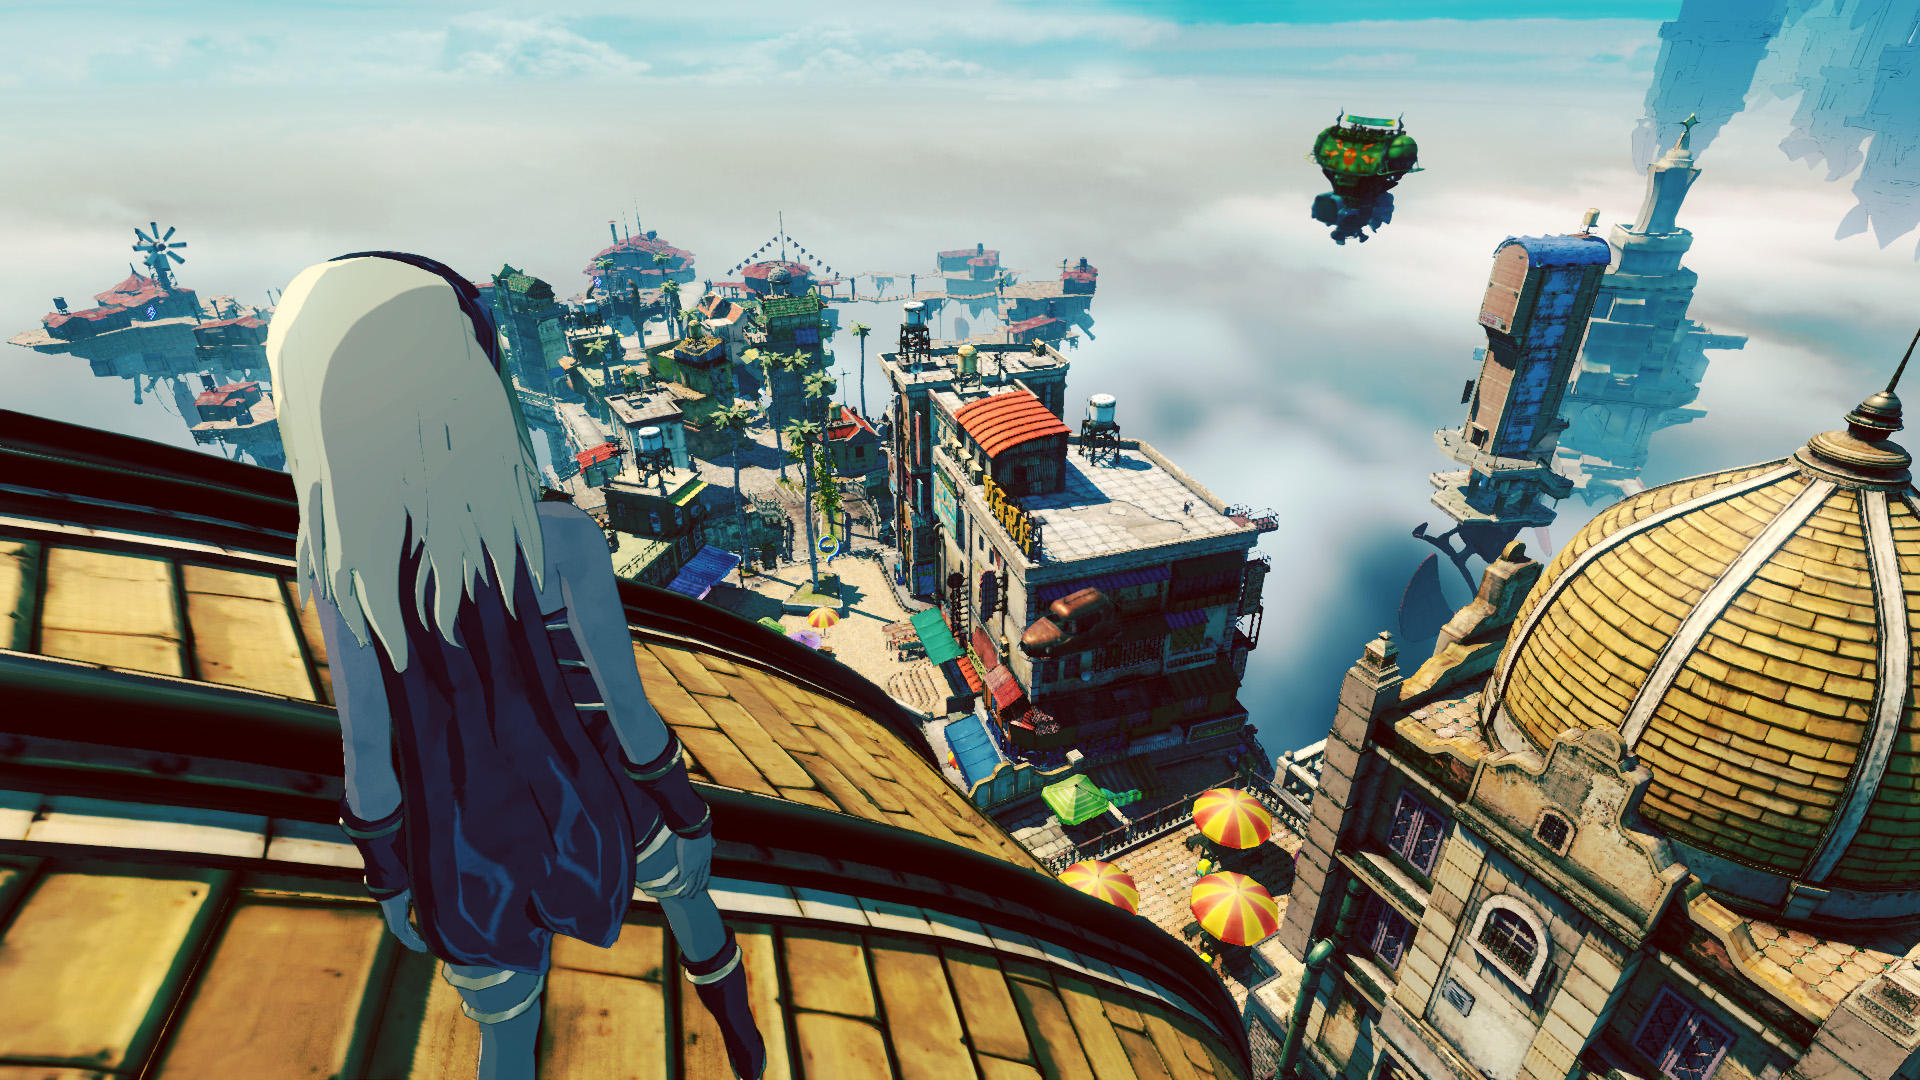 Gravity Rush 2 Release Date and Anime Announced